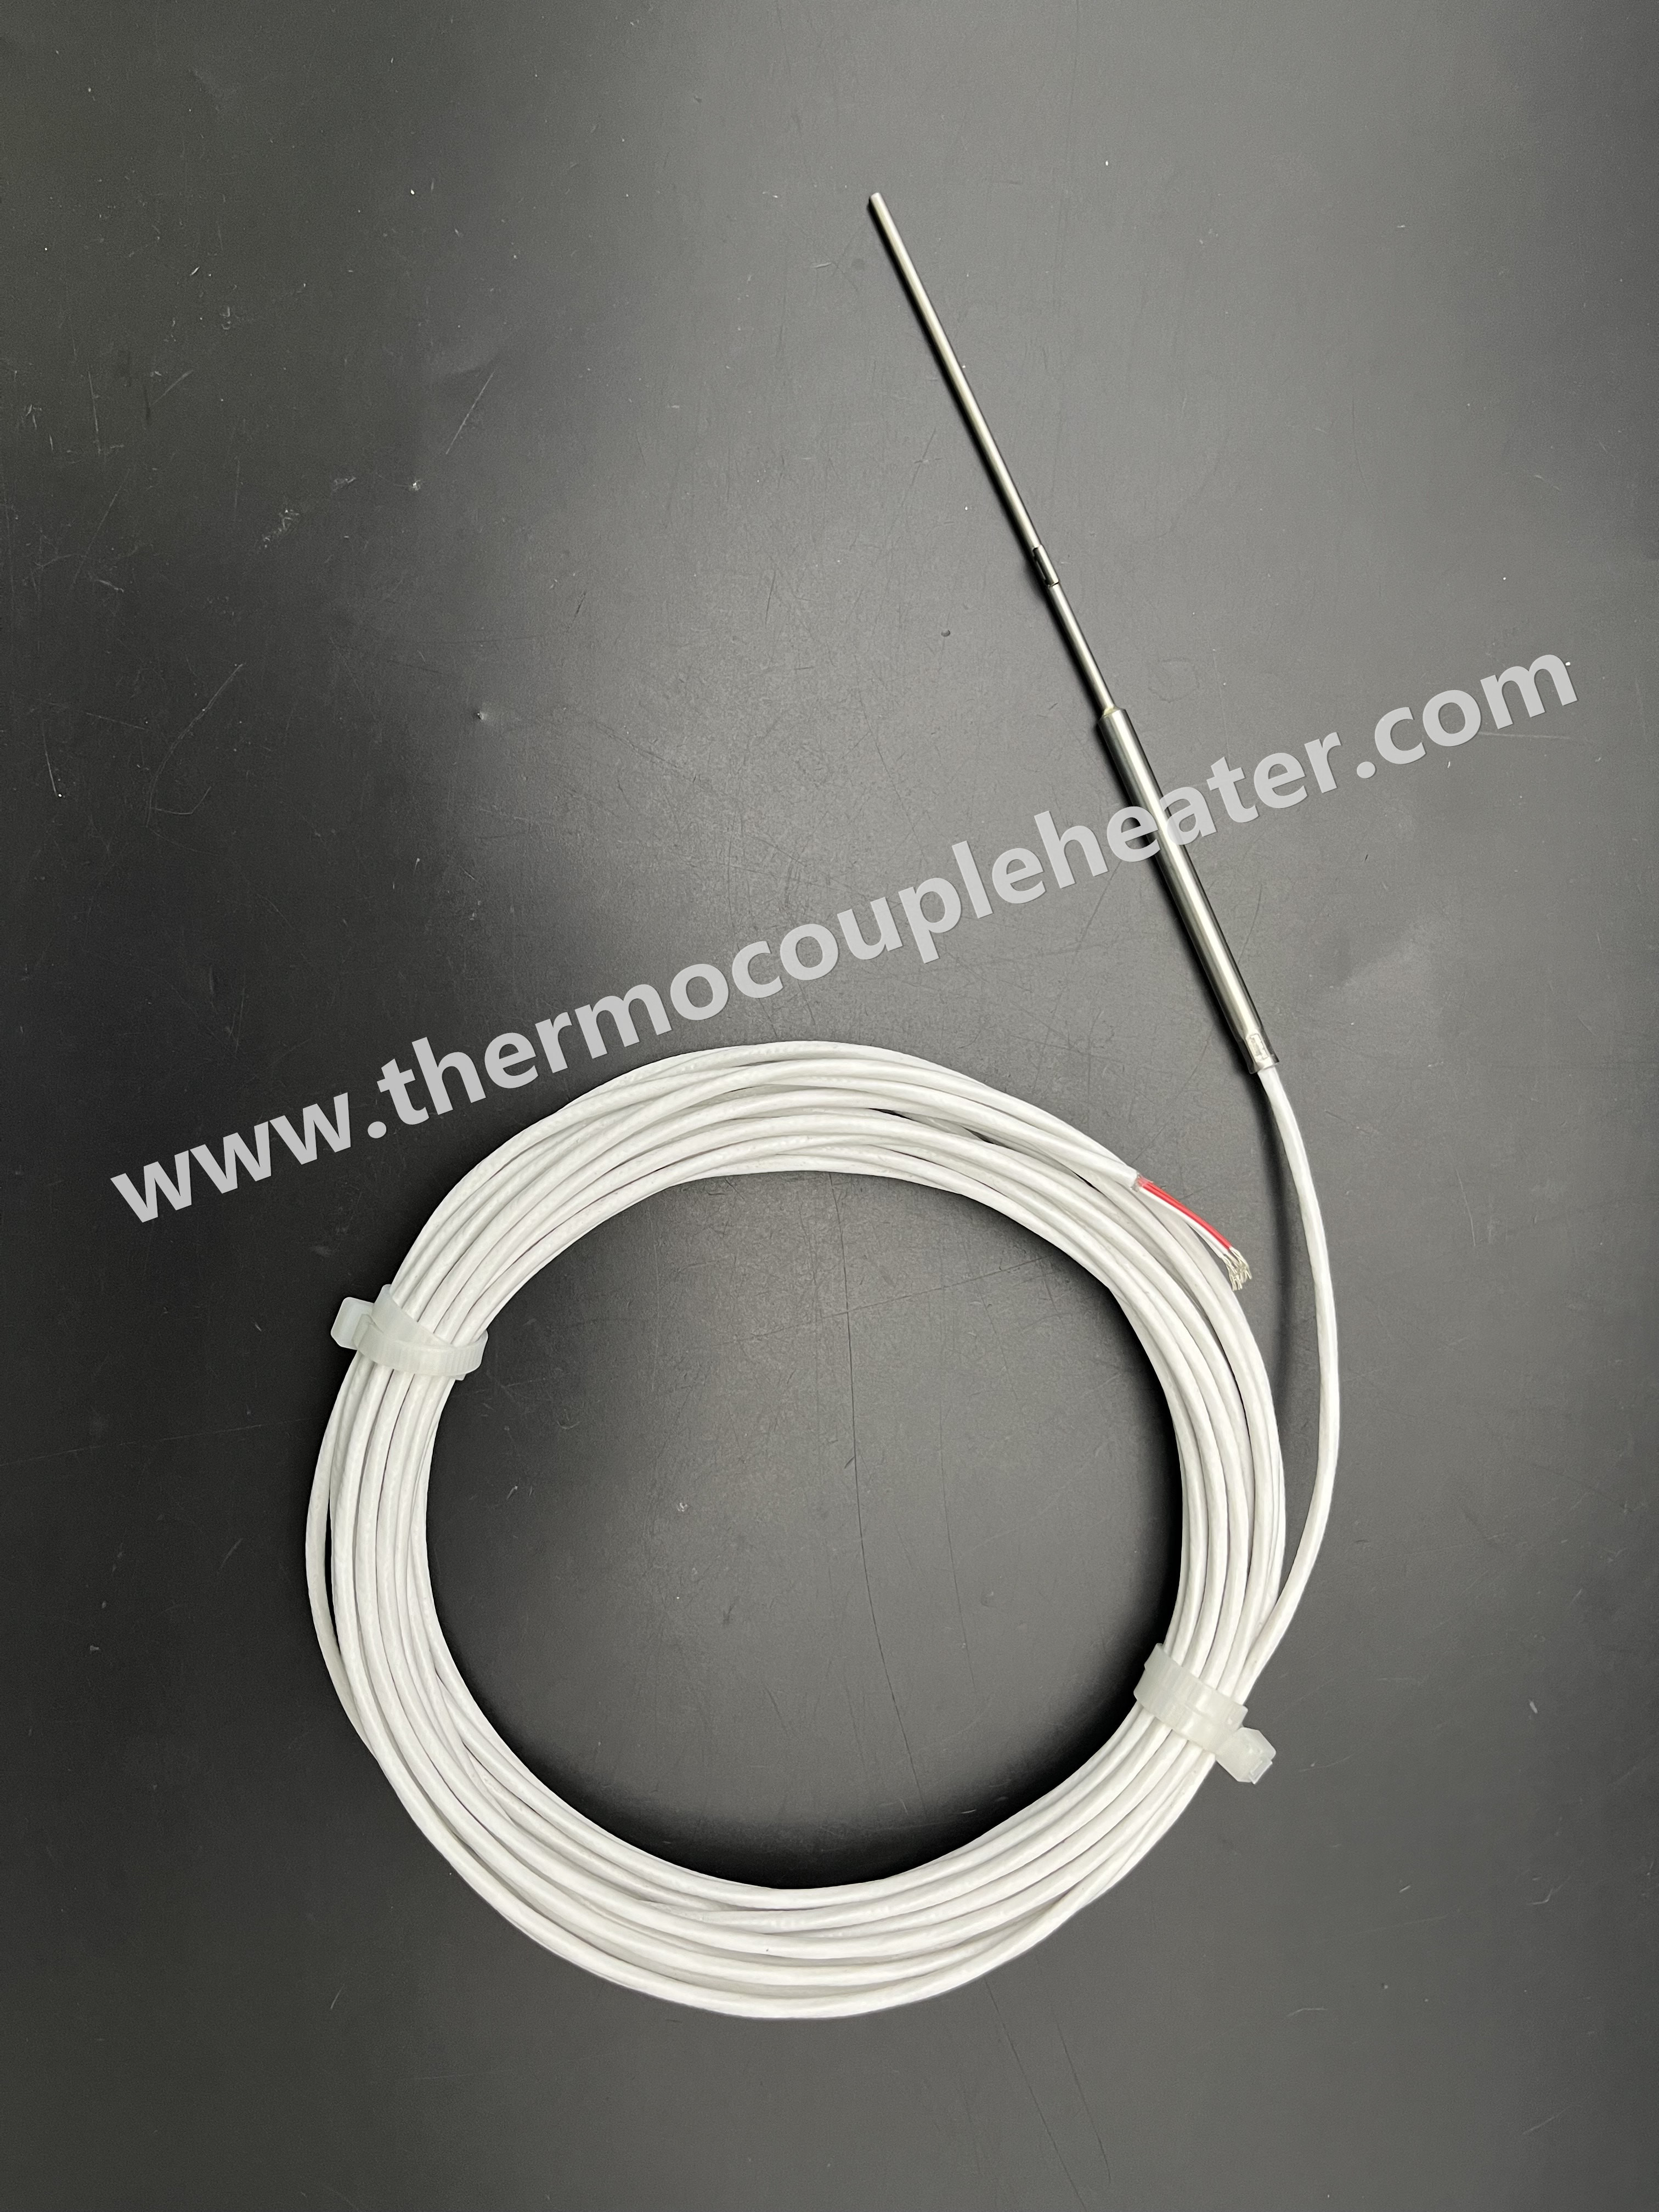 Customized RTD PT100, 4-Wire, SS316 Probe, Accuracy Class A